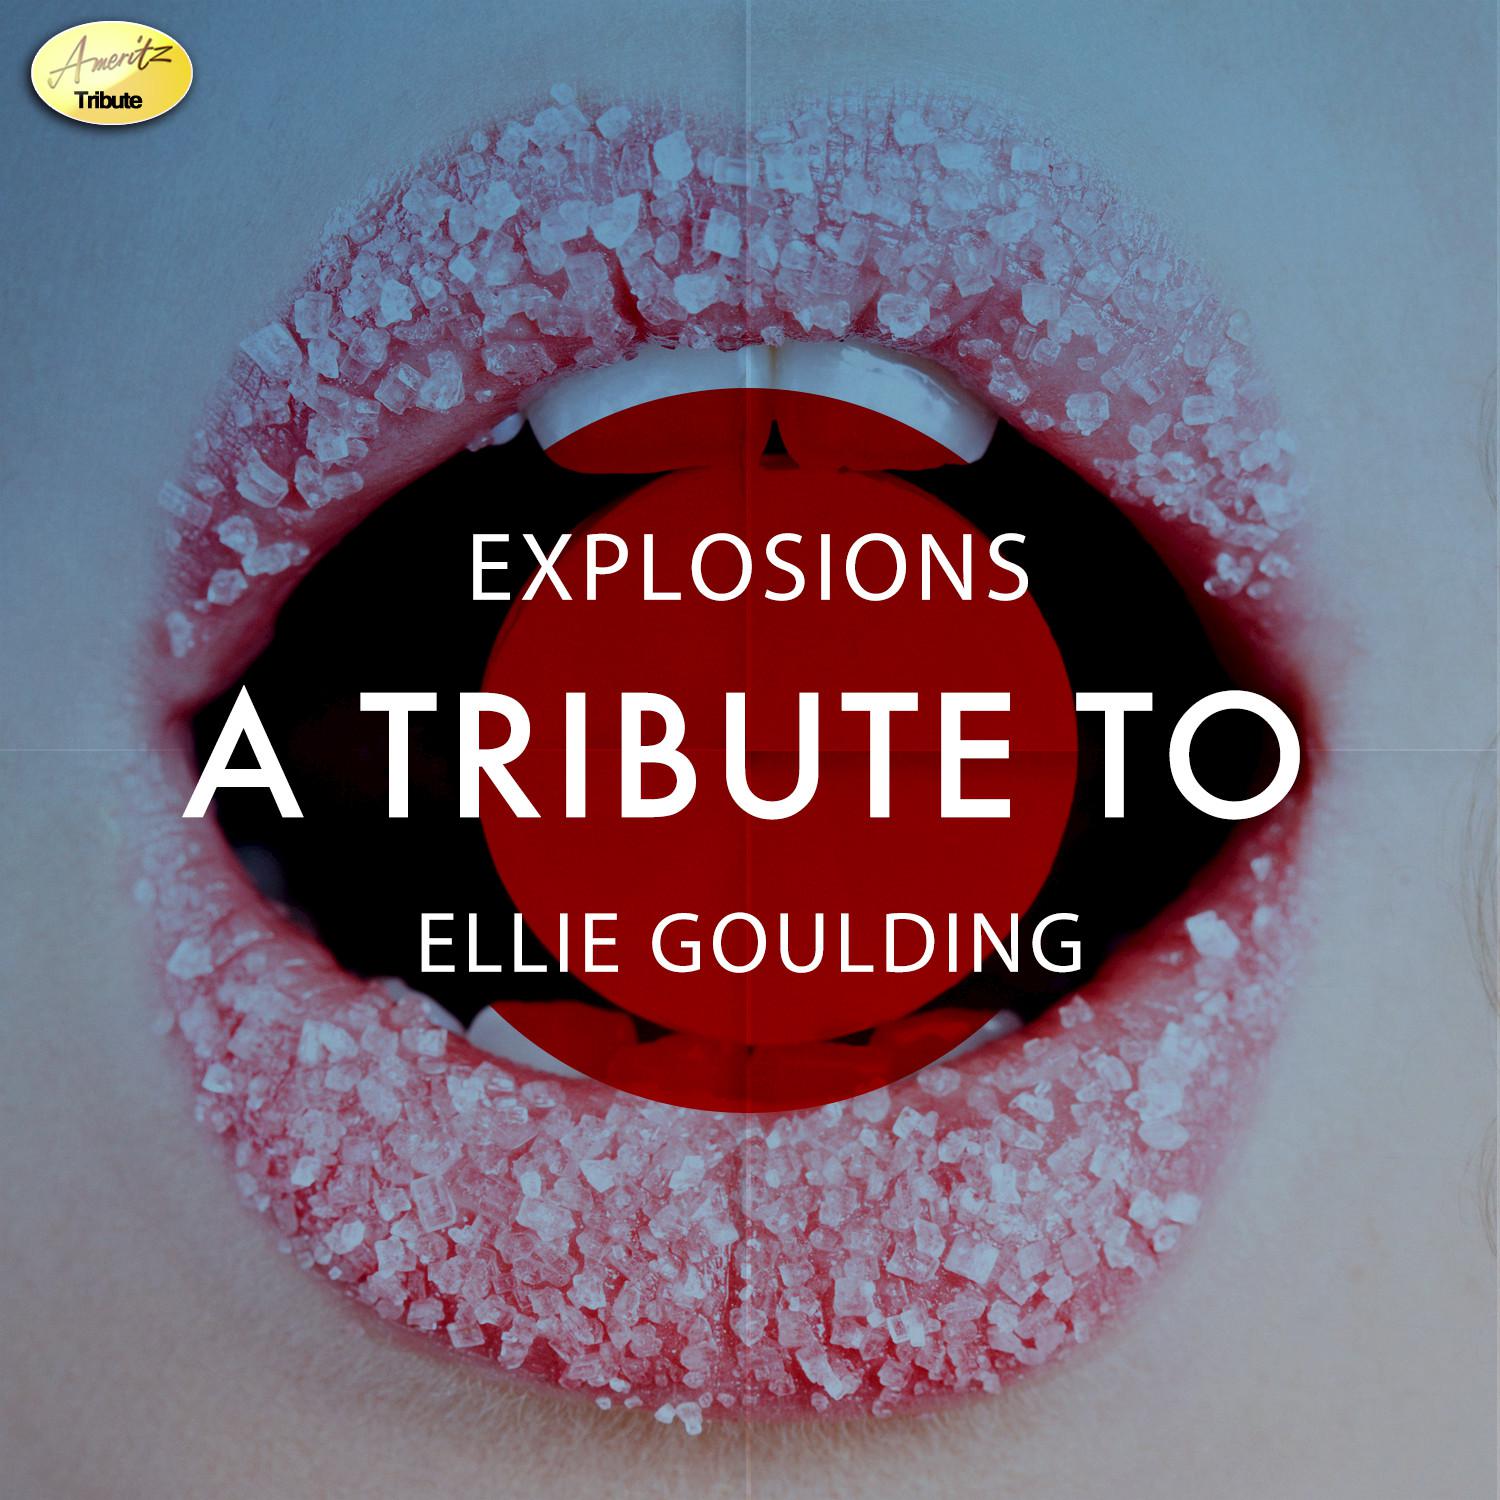 Explosions - A Tribute to Ellie Goulding